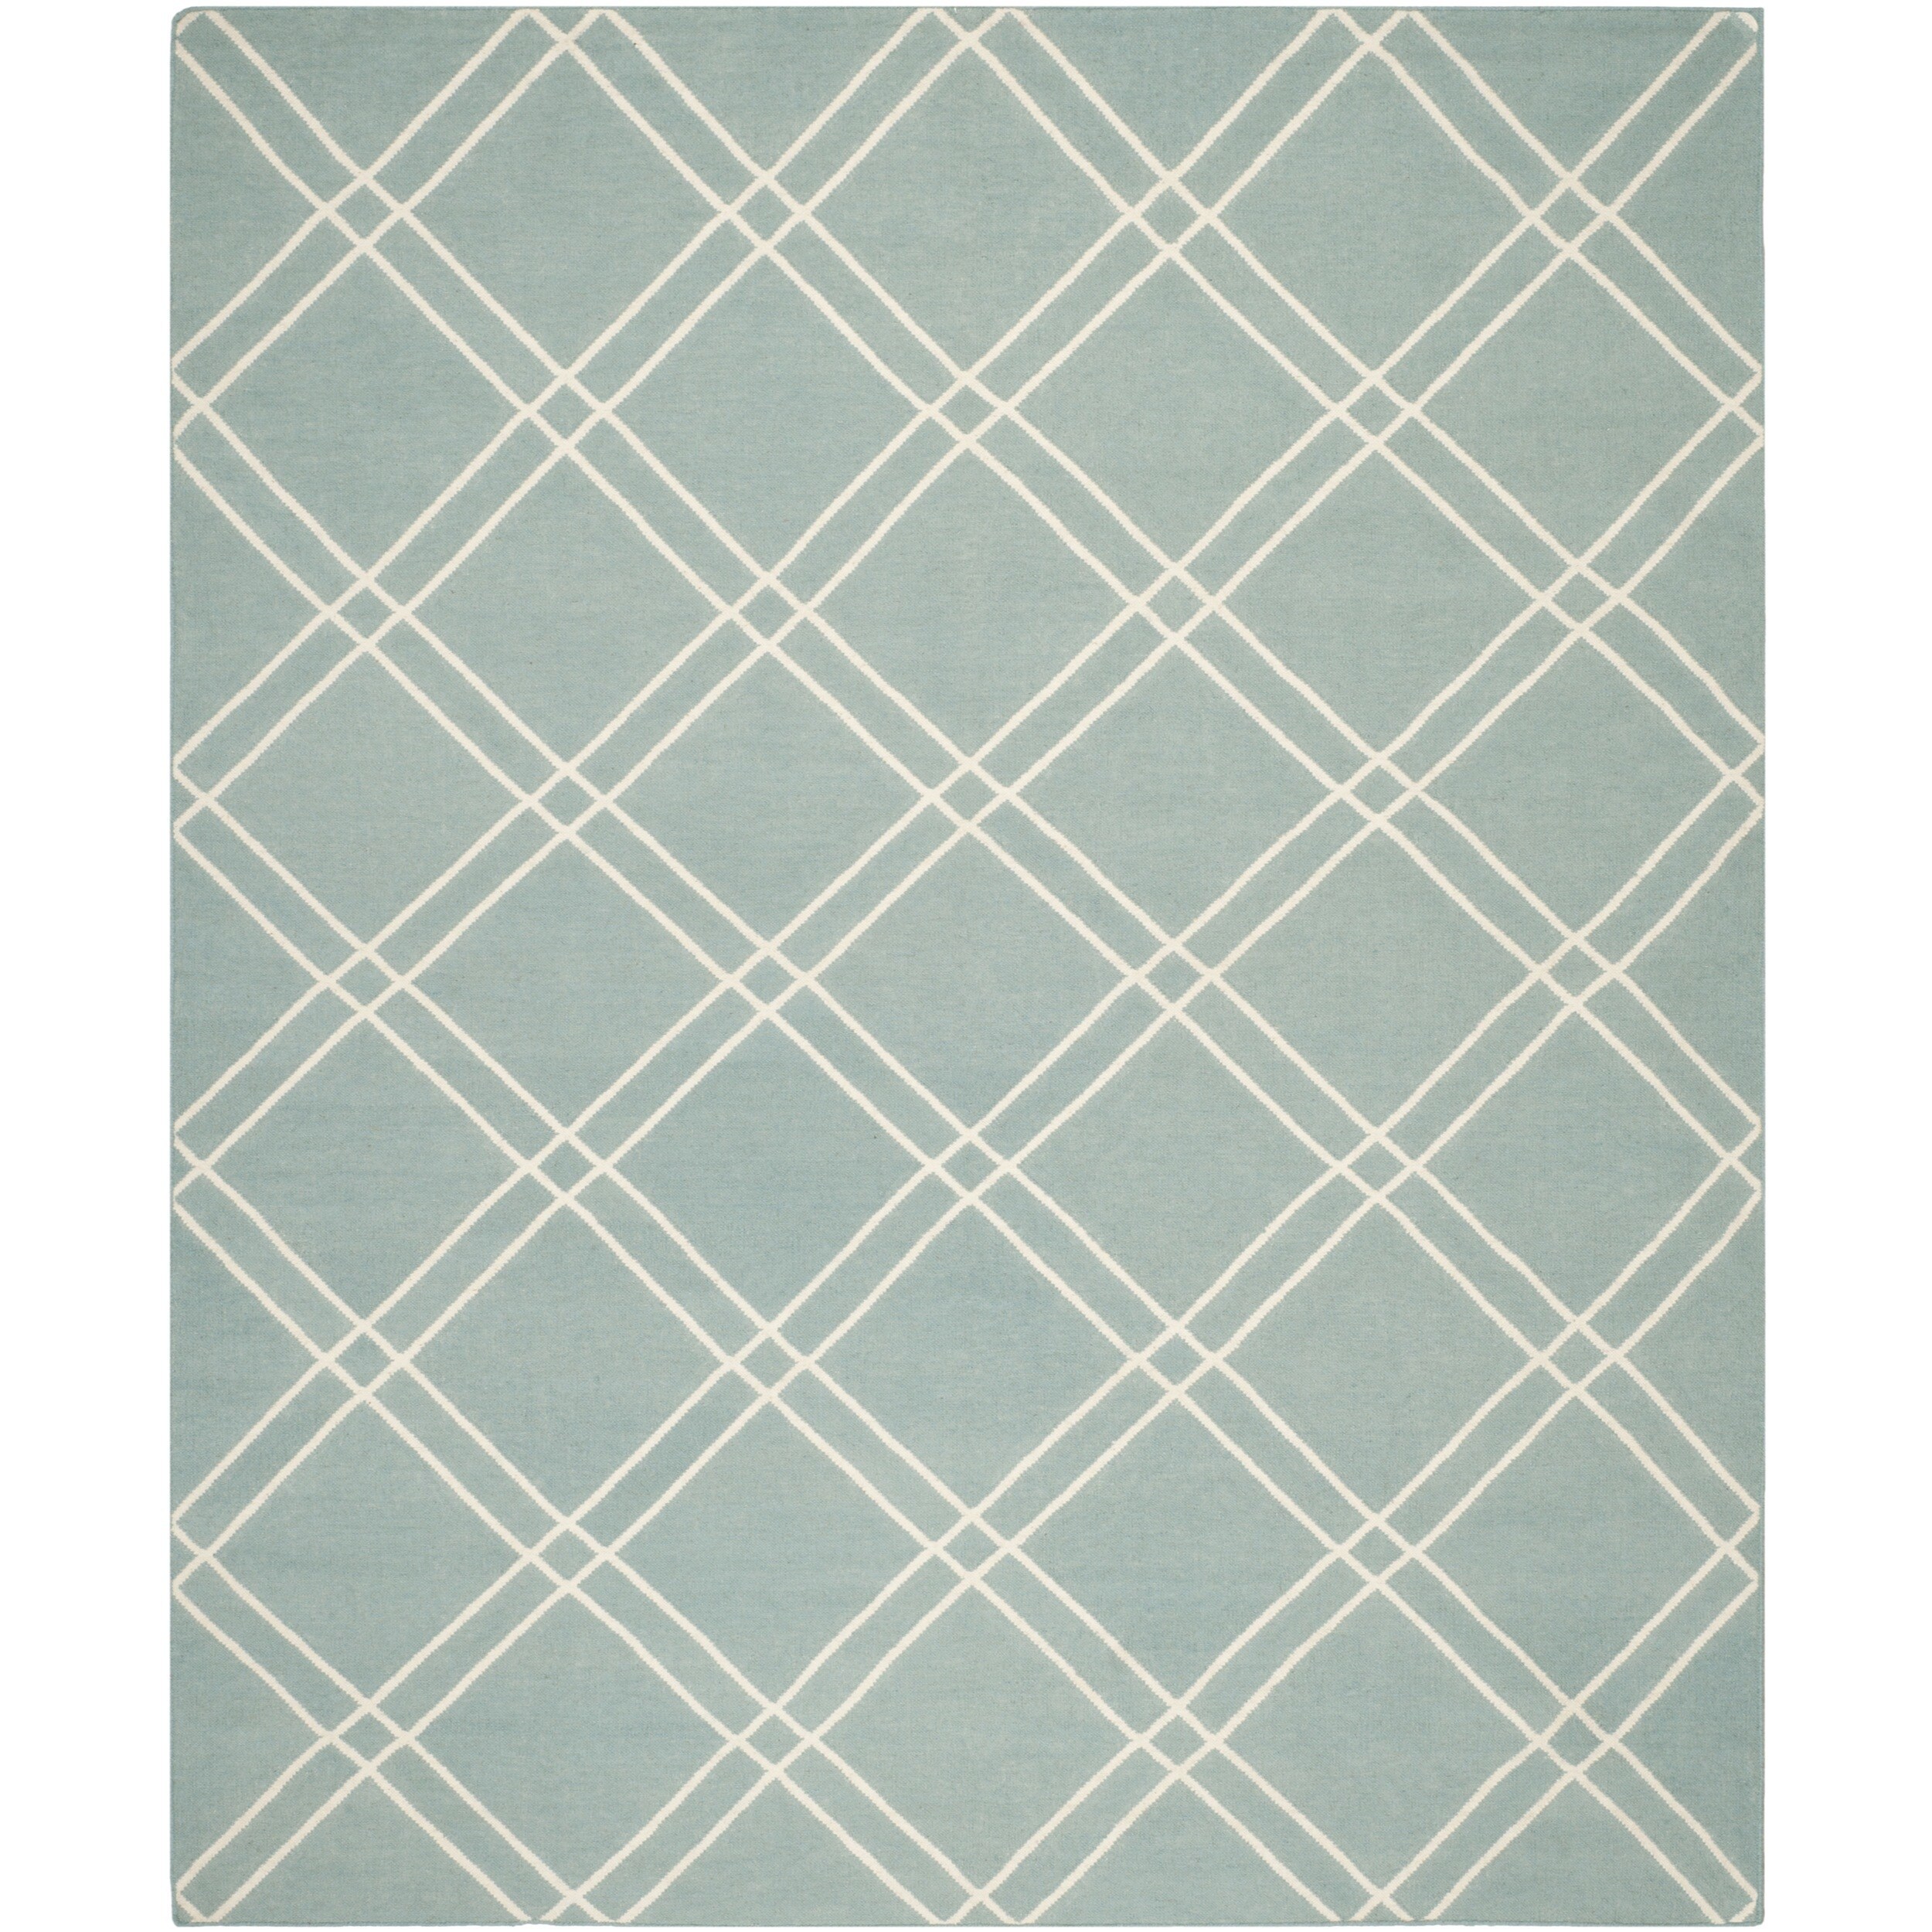 Safavieh Hand woven Moroccan Dhurrie Light Blue/ Ivory Contemporary Wool Rug (5 X 8)